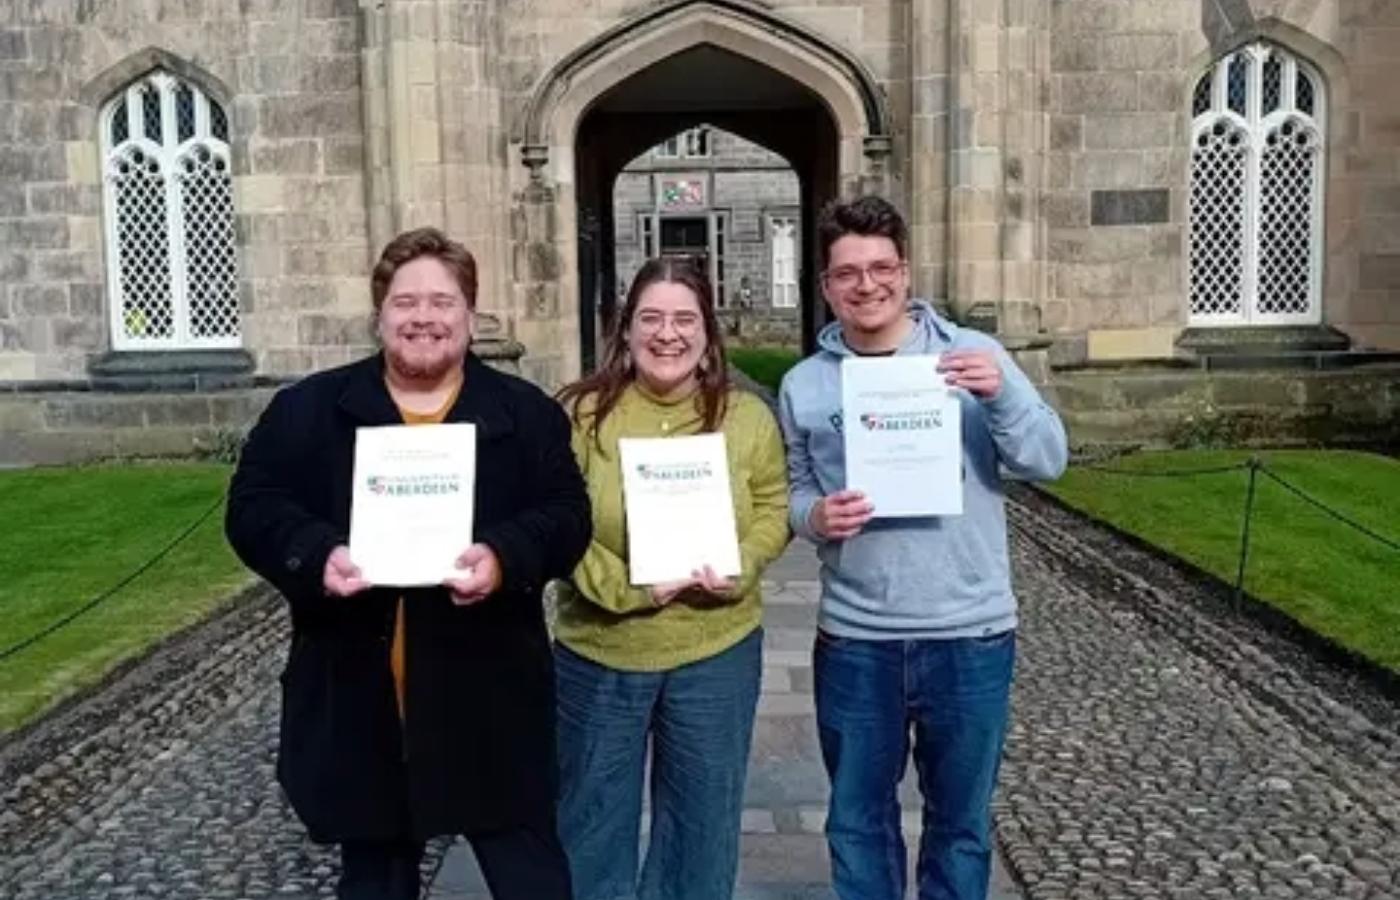 Josh (left), Anna (middle) and John (right) celebrated their graduation together on Tuesday at the University of Aberdeen.